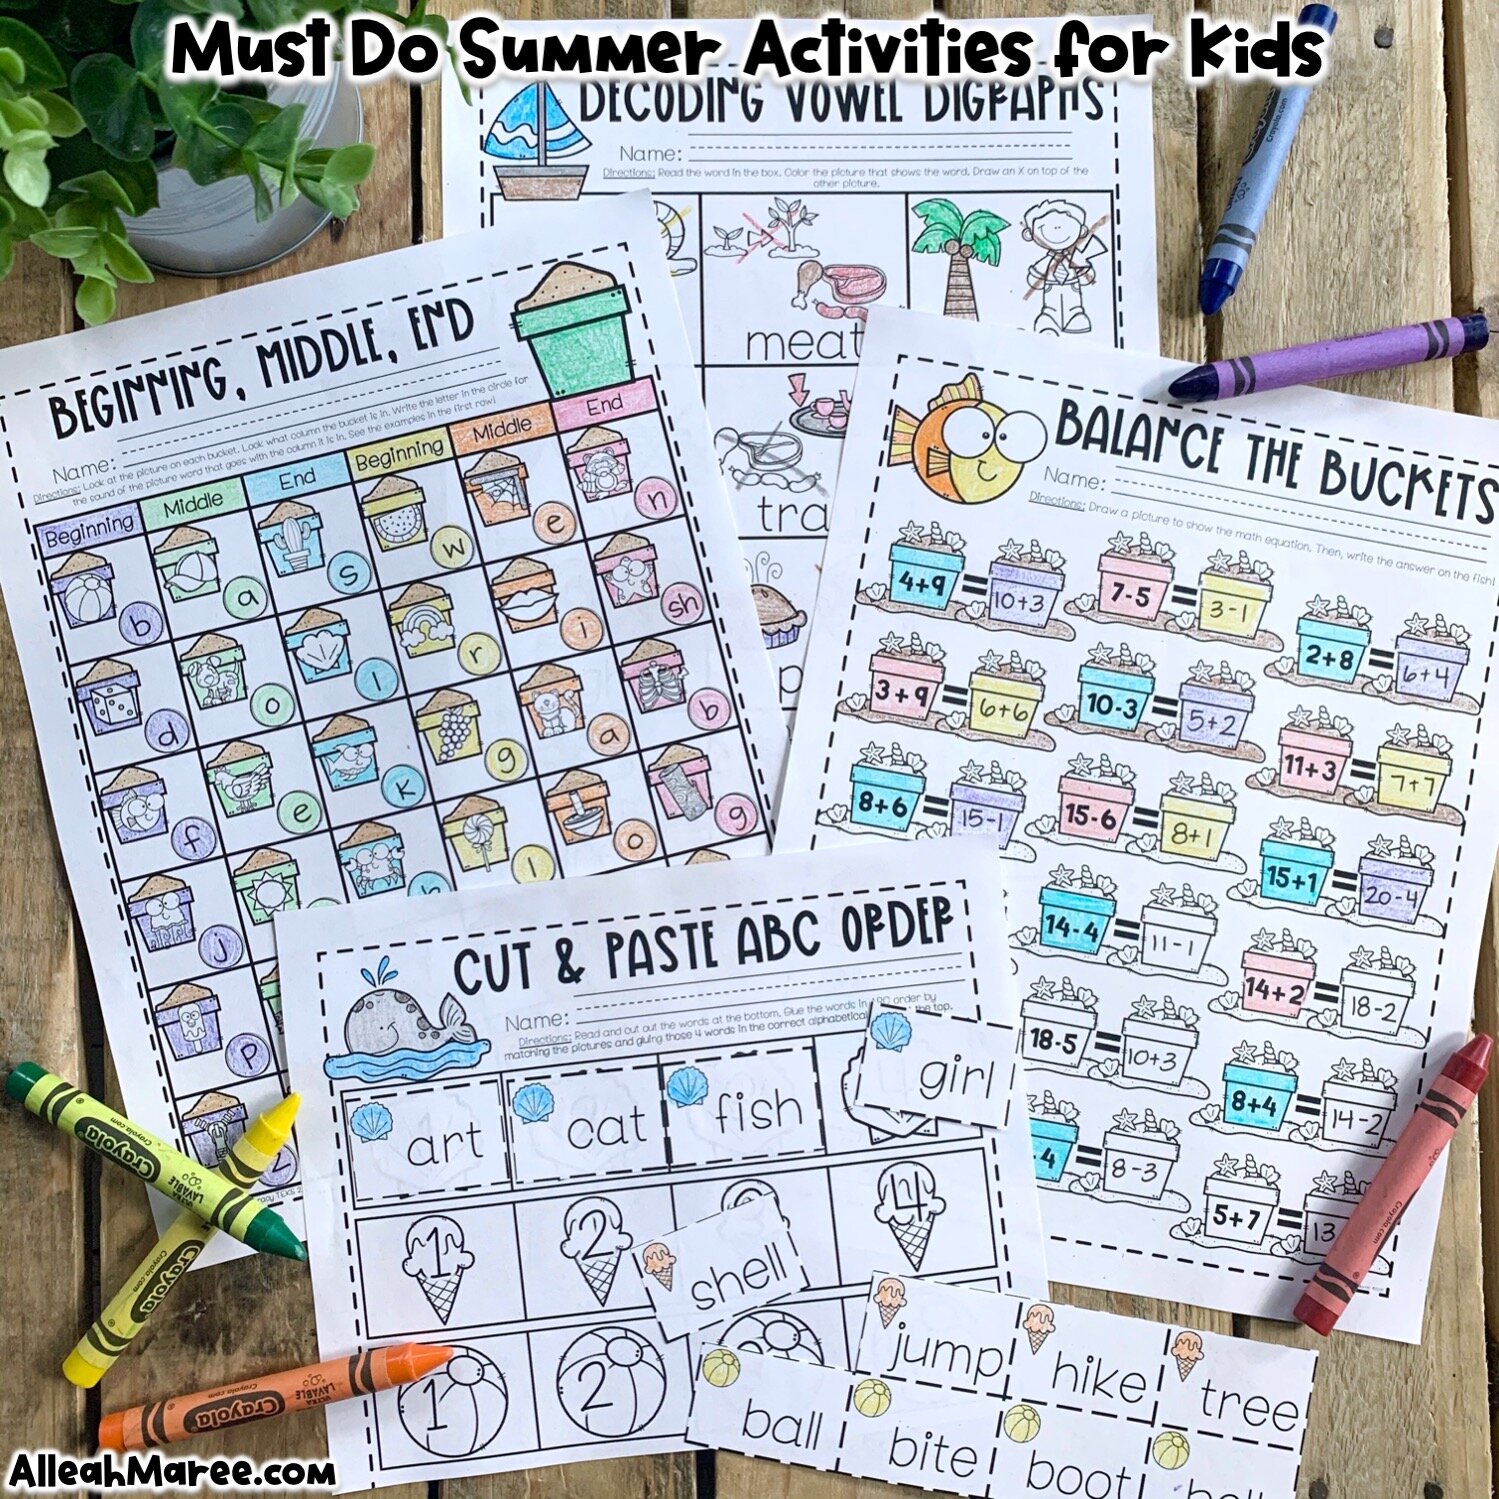 Lily's Little Learners: Summer Fun Guide for Kids